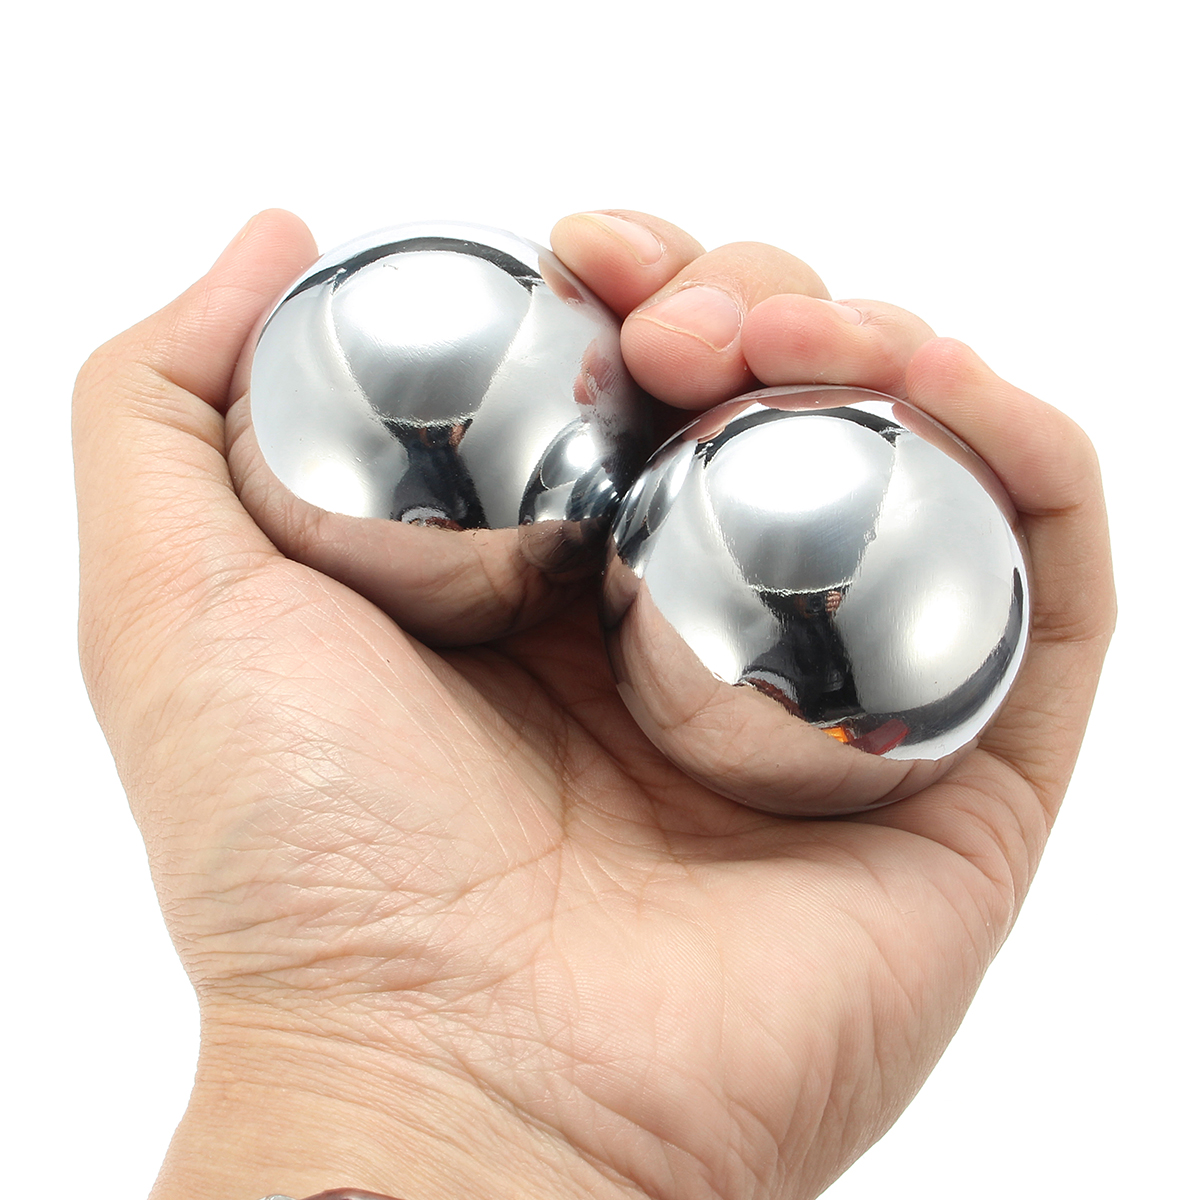 50mm-Chinese-Health-Exercise-Stress-Relaxation-Therapy-Chrome-Massage-Baoding-Ball-1122757